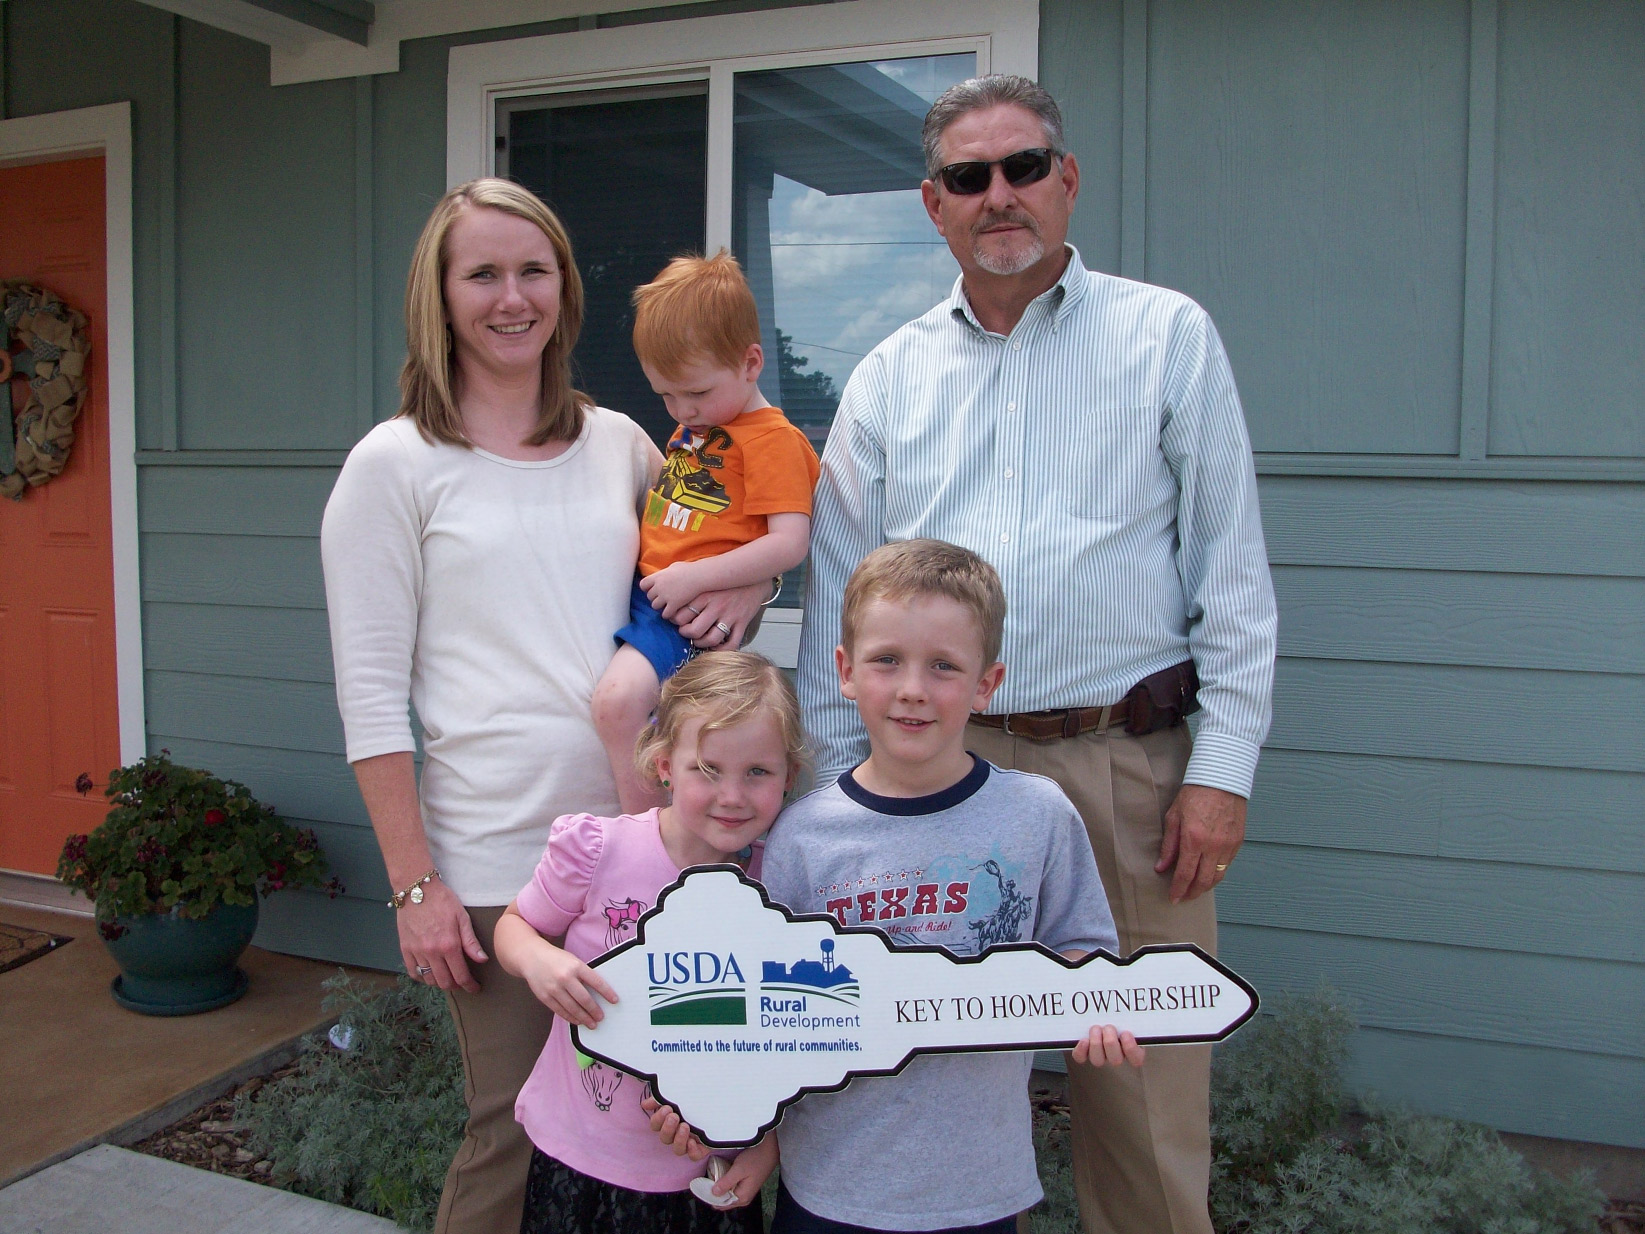 Family stands in front of their new home due to USDA's Rural Development (RD) home ownership program